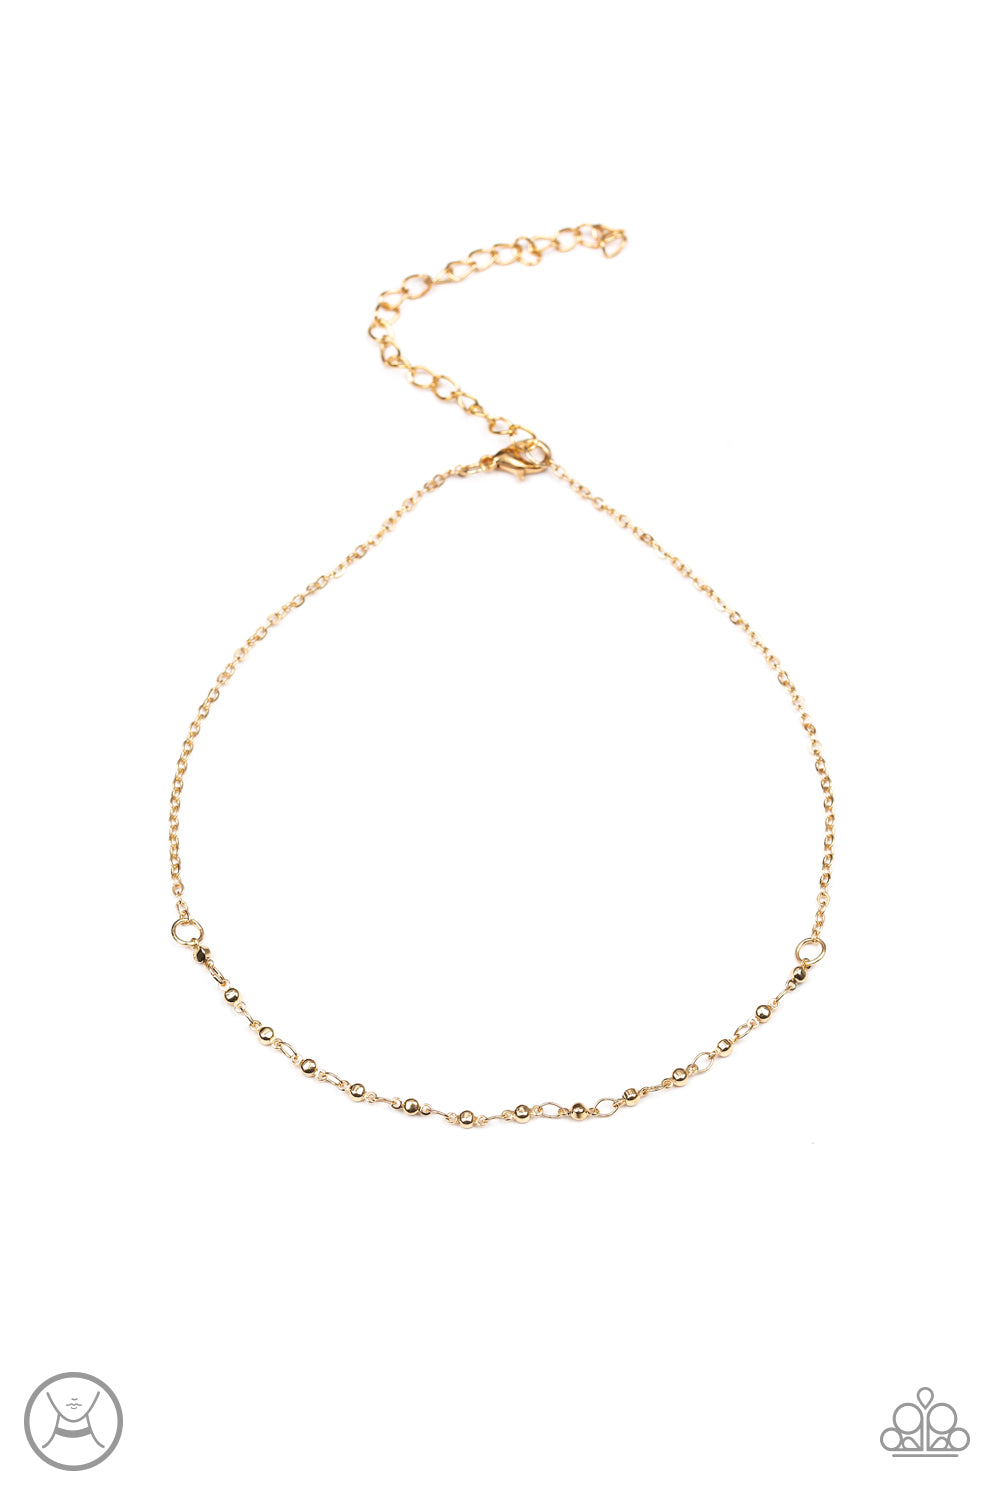 Take a Risk - gold - Paparazzi necklace